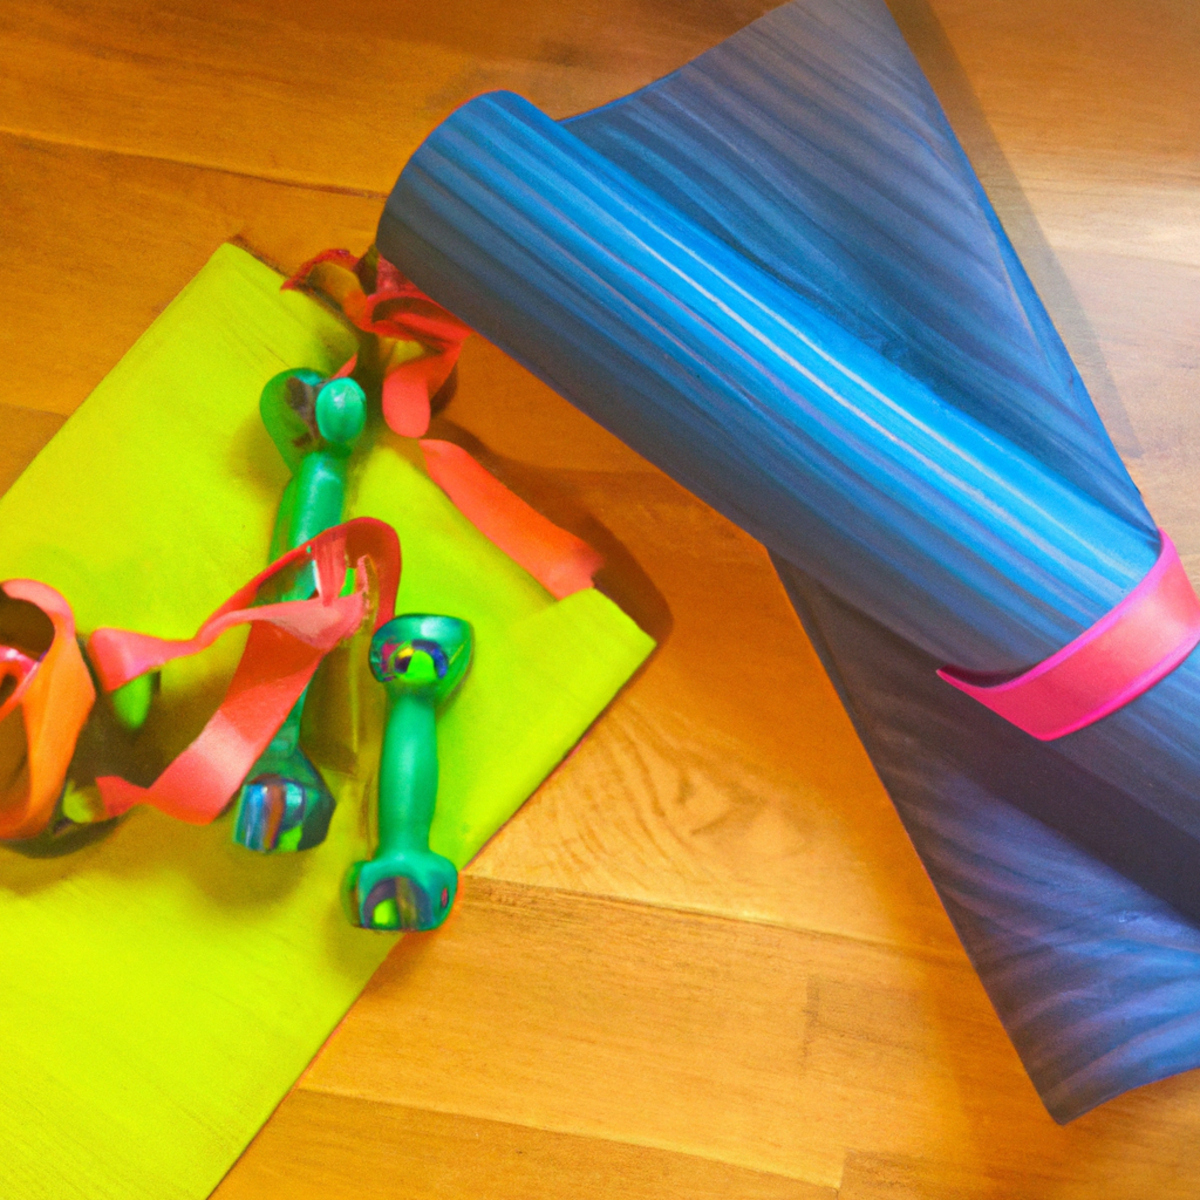 The photo captures a set of colorful resistance bands, a pair of light dumbbells, and a yoga mat laid out on the floor. The bands are stretched out, ready for use, while the dumbbells sit neatly beside them. The yoga mat is rolled out, inviting the viewer to imagine a senior practicing their poses. The lighting is bright and natural, highlighting the vibrant colors of the equipment and creating a warm and inviting atmosphere. The photo perfectly captures the essence of the article, showcasing the tools and equipment needed for fun and effective senior exercises and fitness routines for a healthy heart.